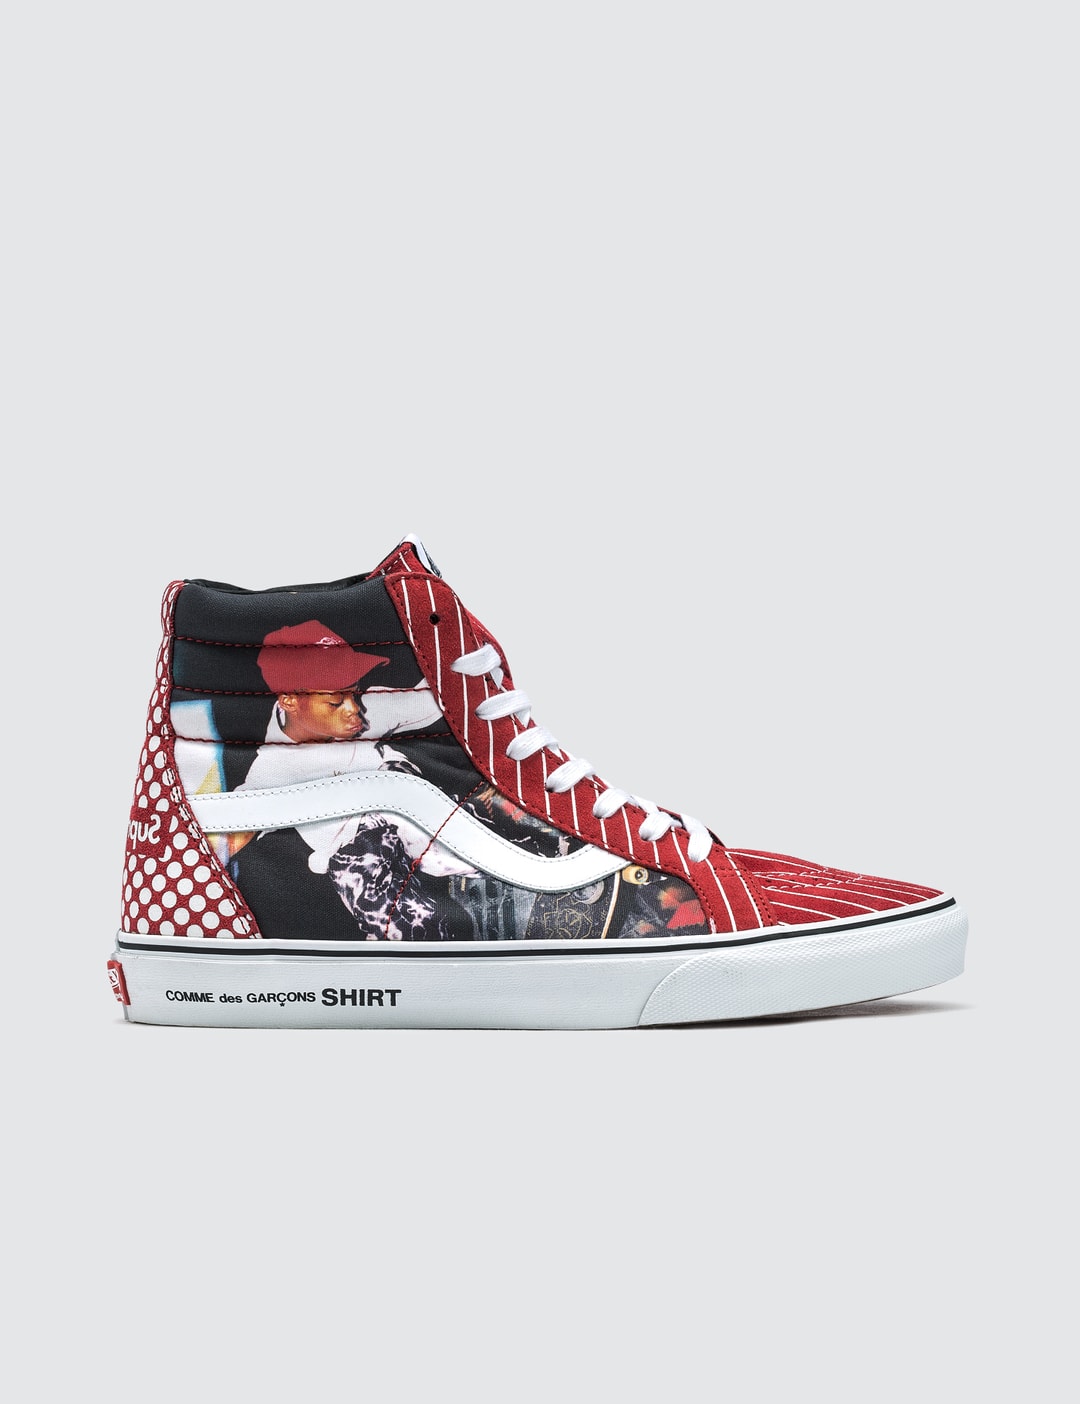 telefon crush tab Vans - Comme Des Garcons X Supreme X Vans Sk8 Hi | HBX - Globally Curated  Fashion and Lifestyle by Hypebeast